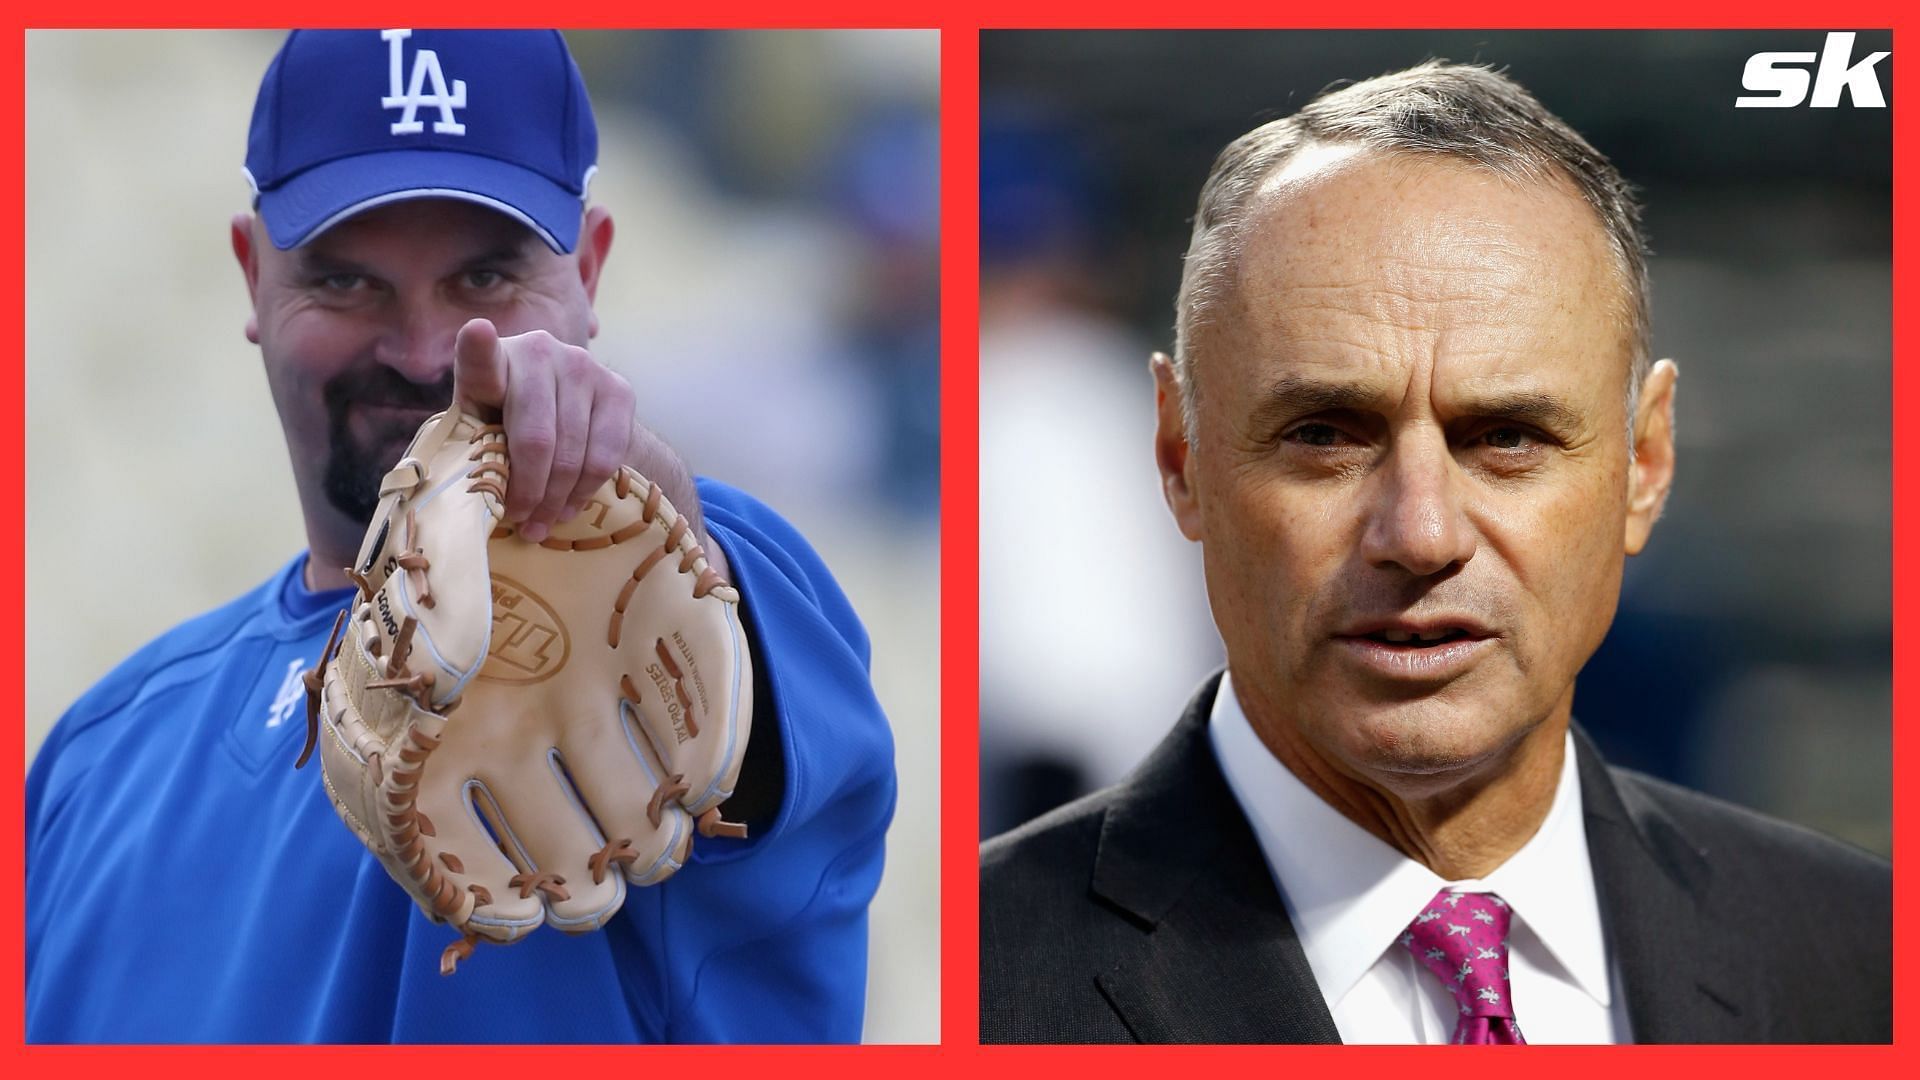 Former MLB pitcher David Wells has accused Rob Manfred of hating baseball